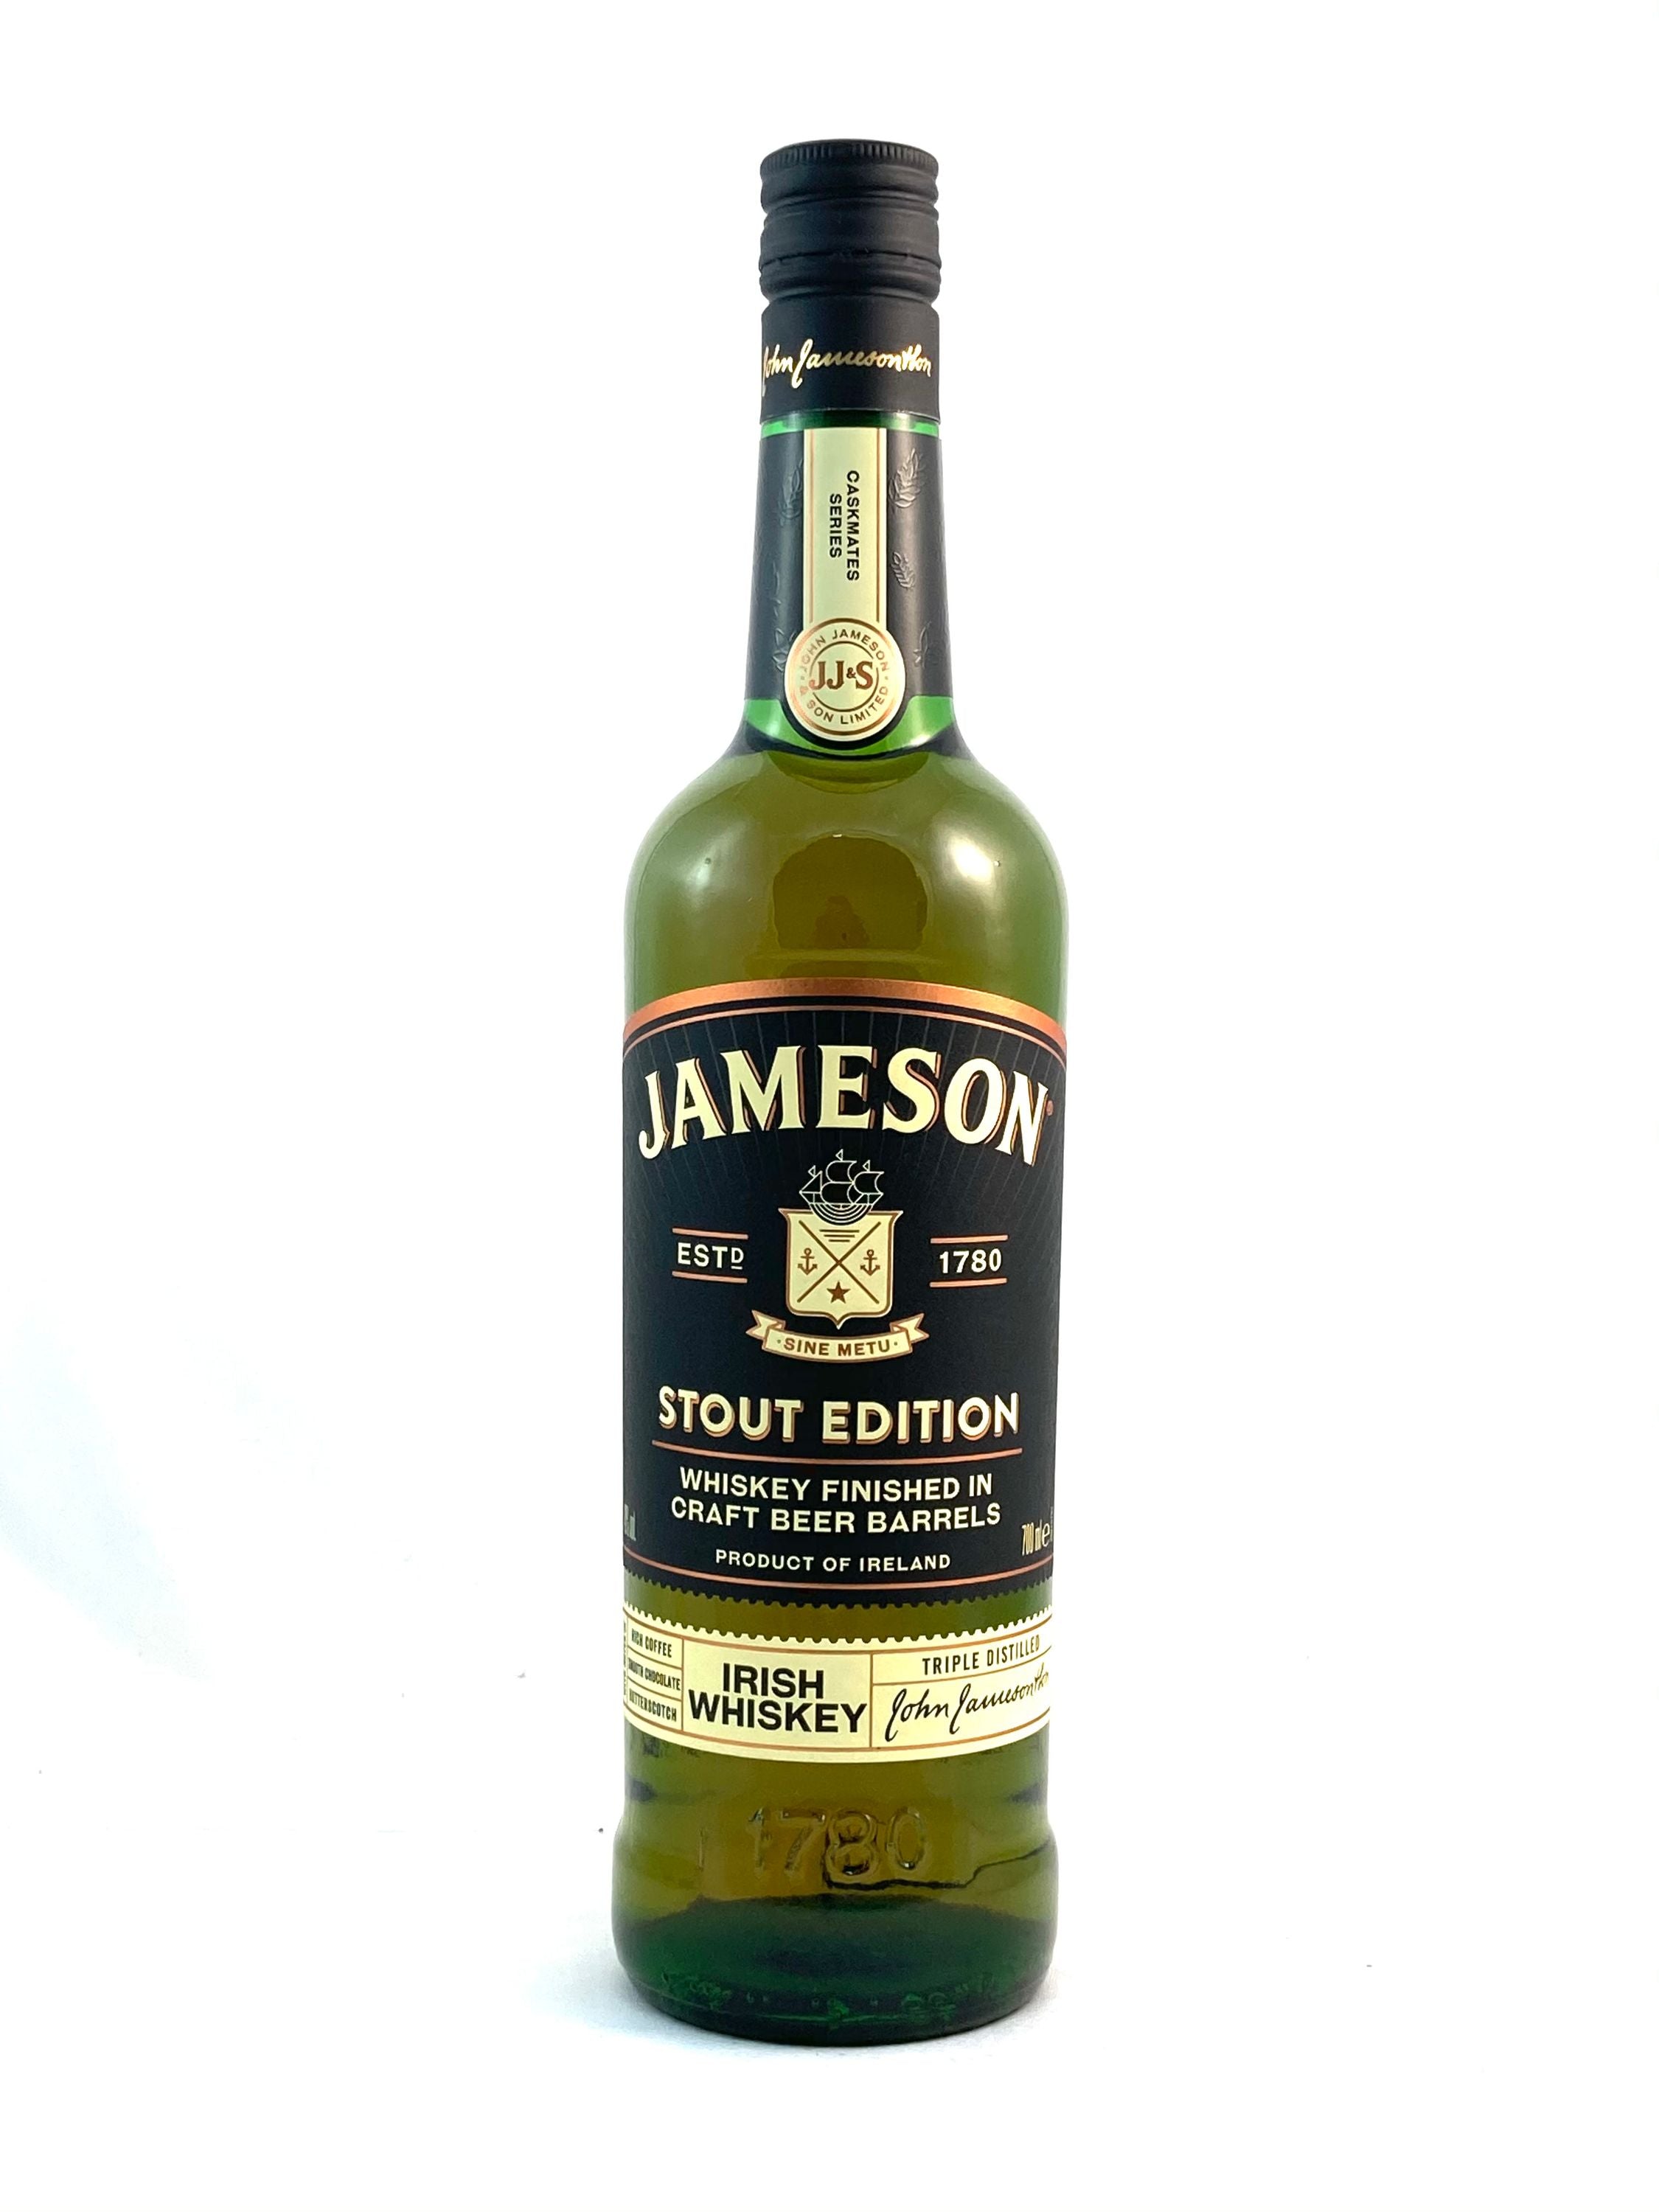 Jameson Stout Edition Blended Irish Whiskey, 0.7l, alc. 40% by volume